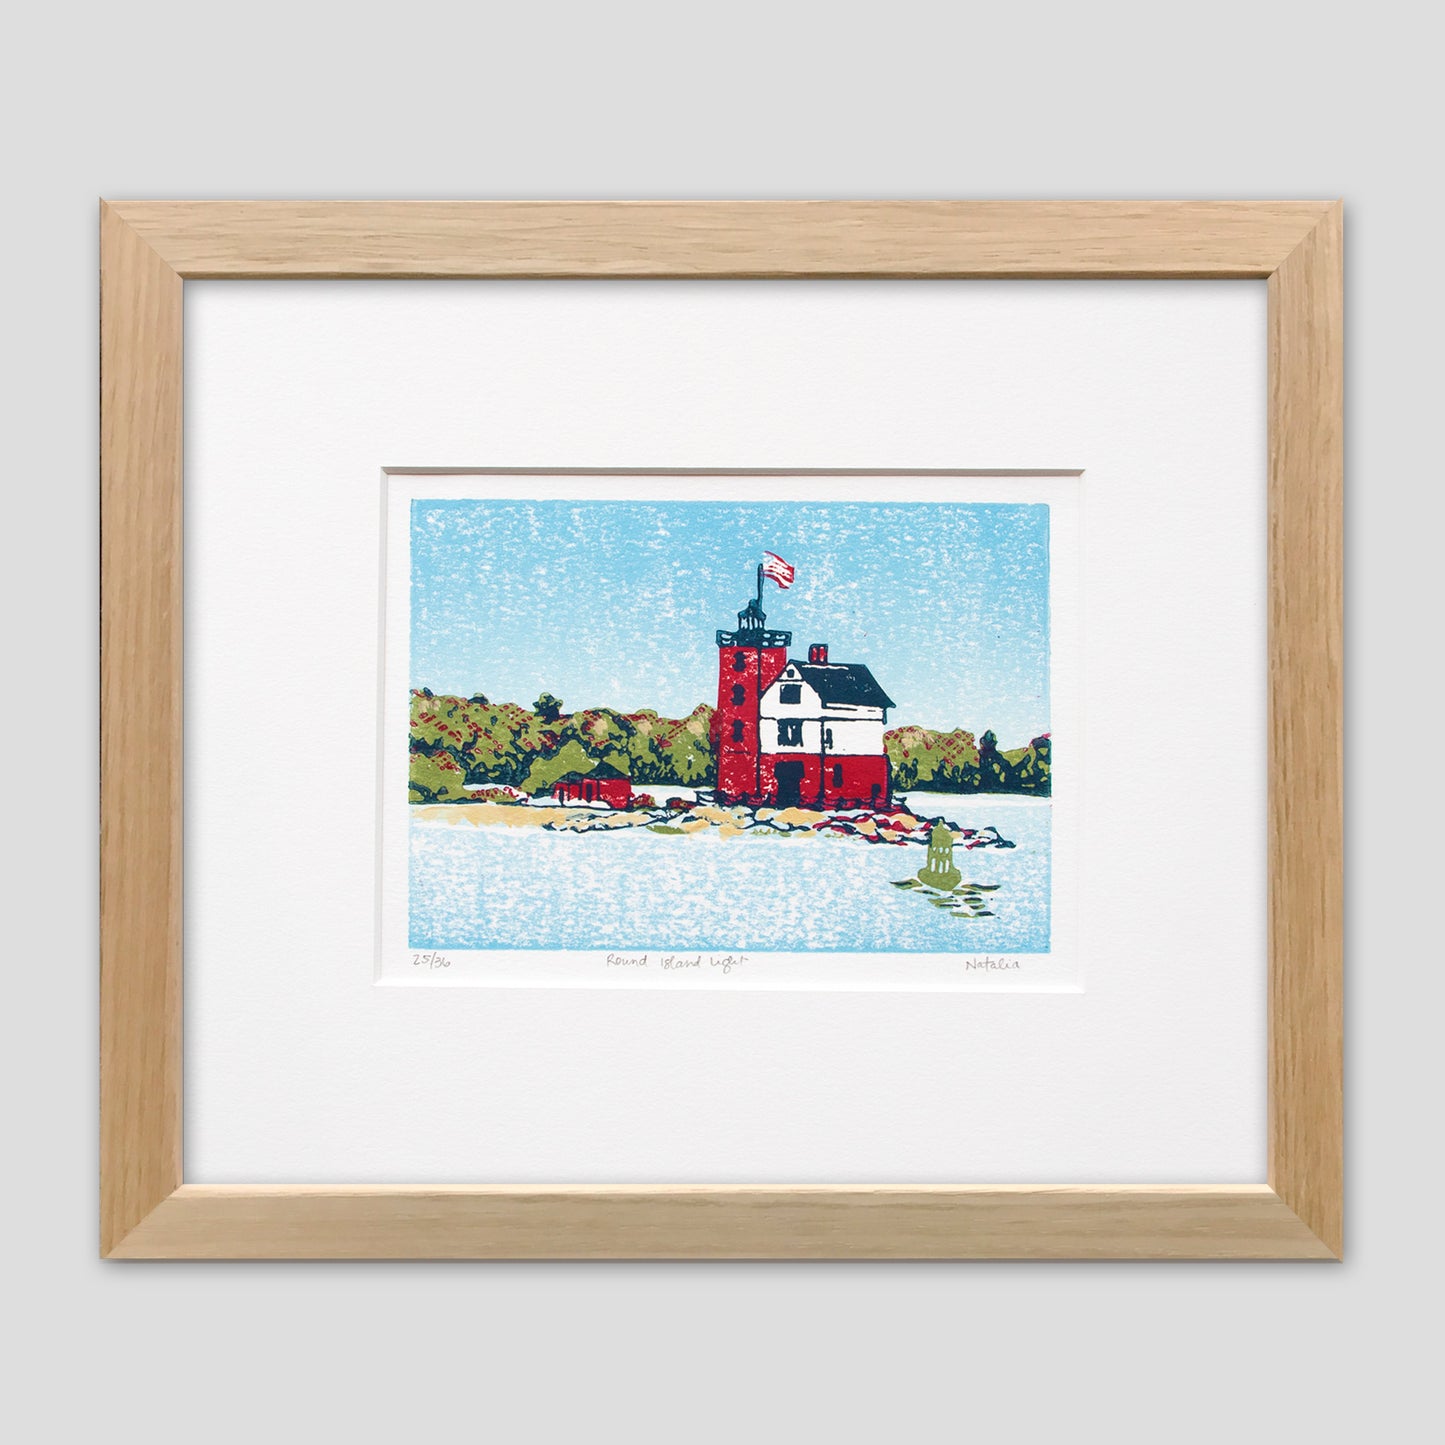 Framed nautical art created by Natalia Wohletz of Peninsula Prints, Mackinac Island. Round Island Light is a four-color linoleum block print of one of Michigan's most beloved lighthouses. 